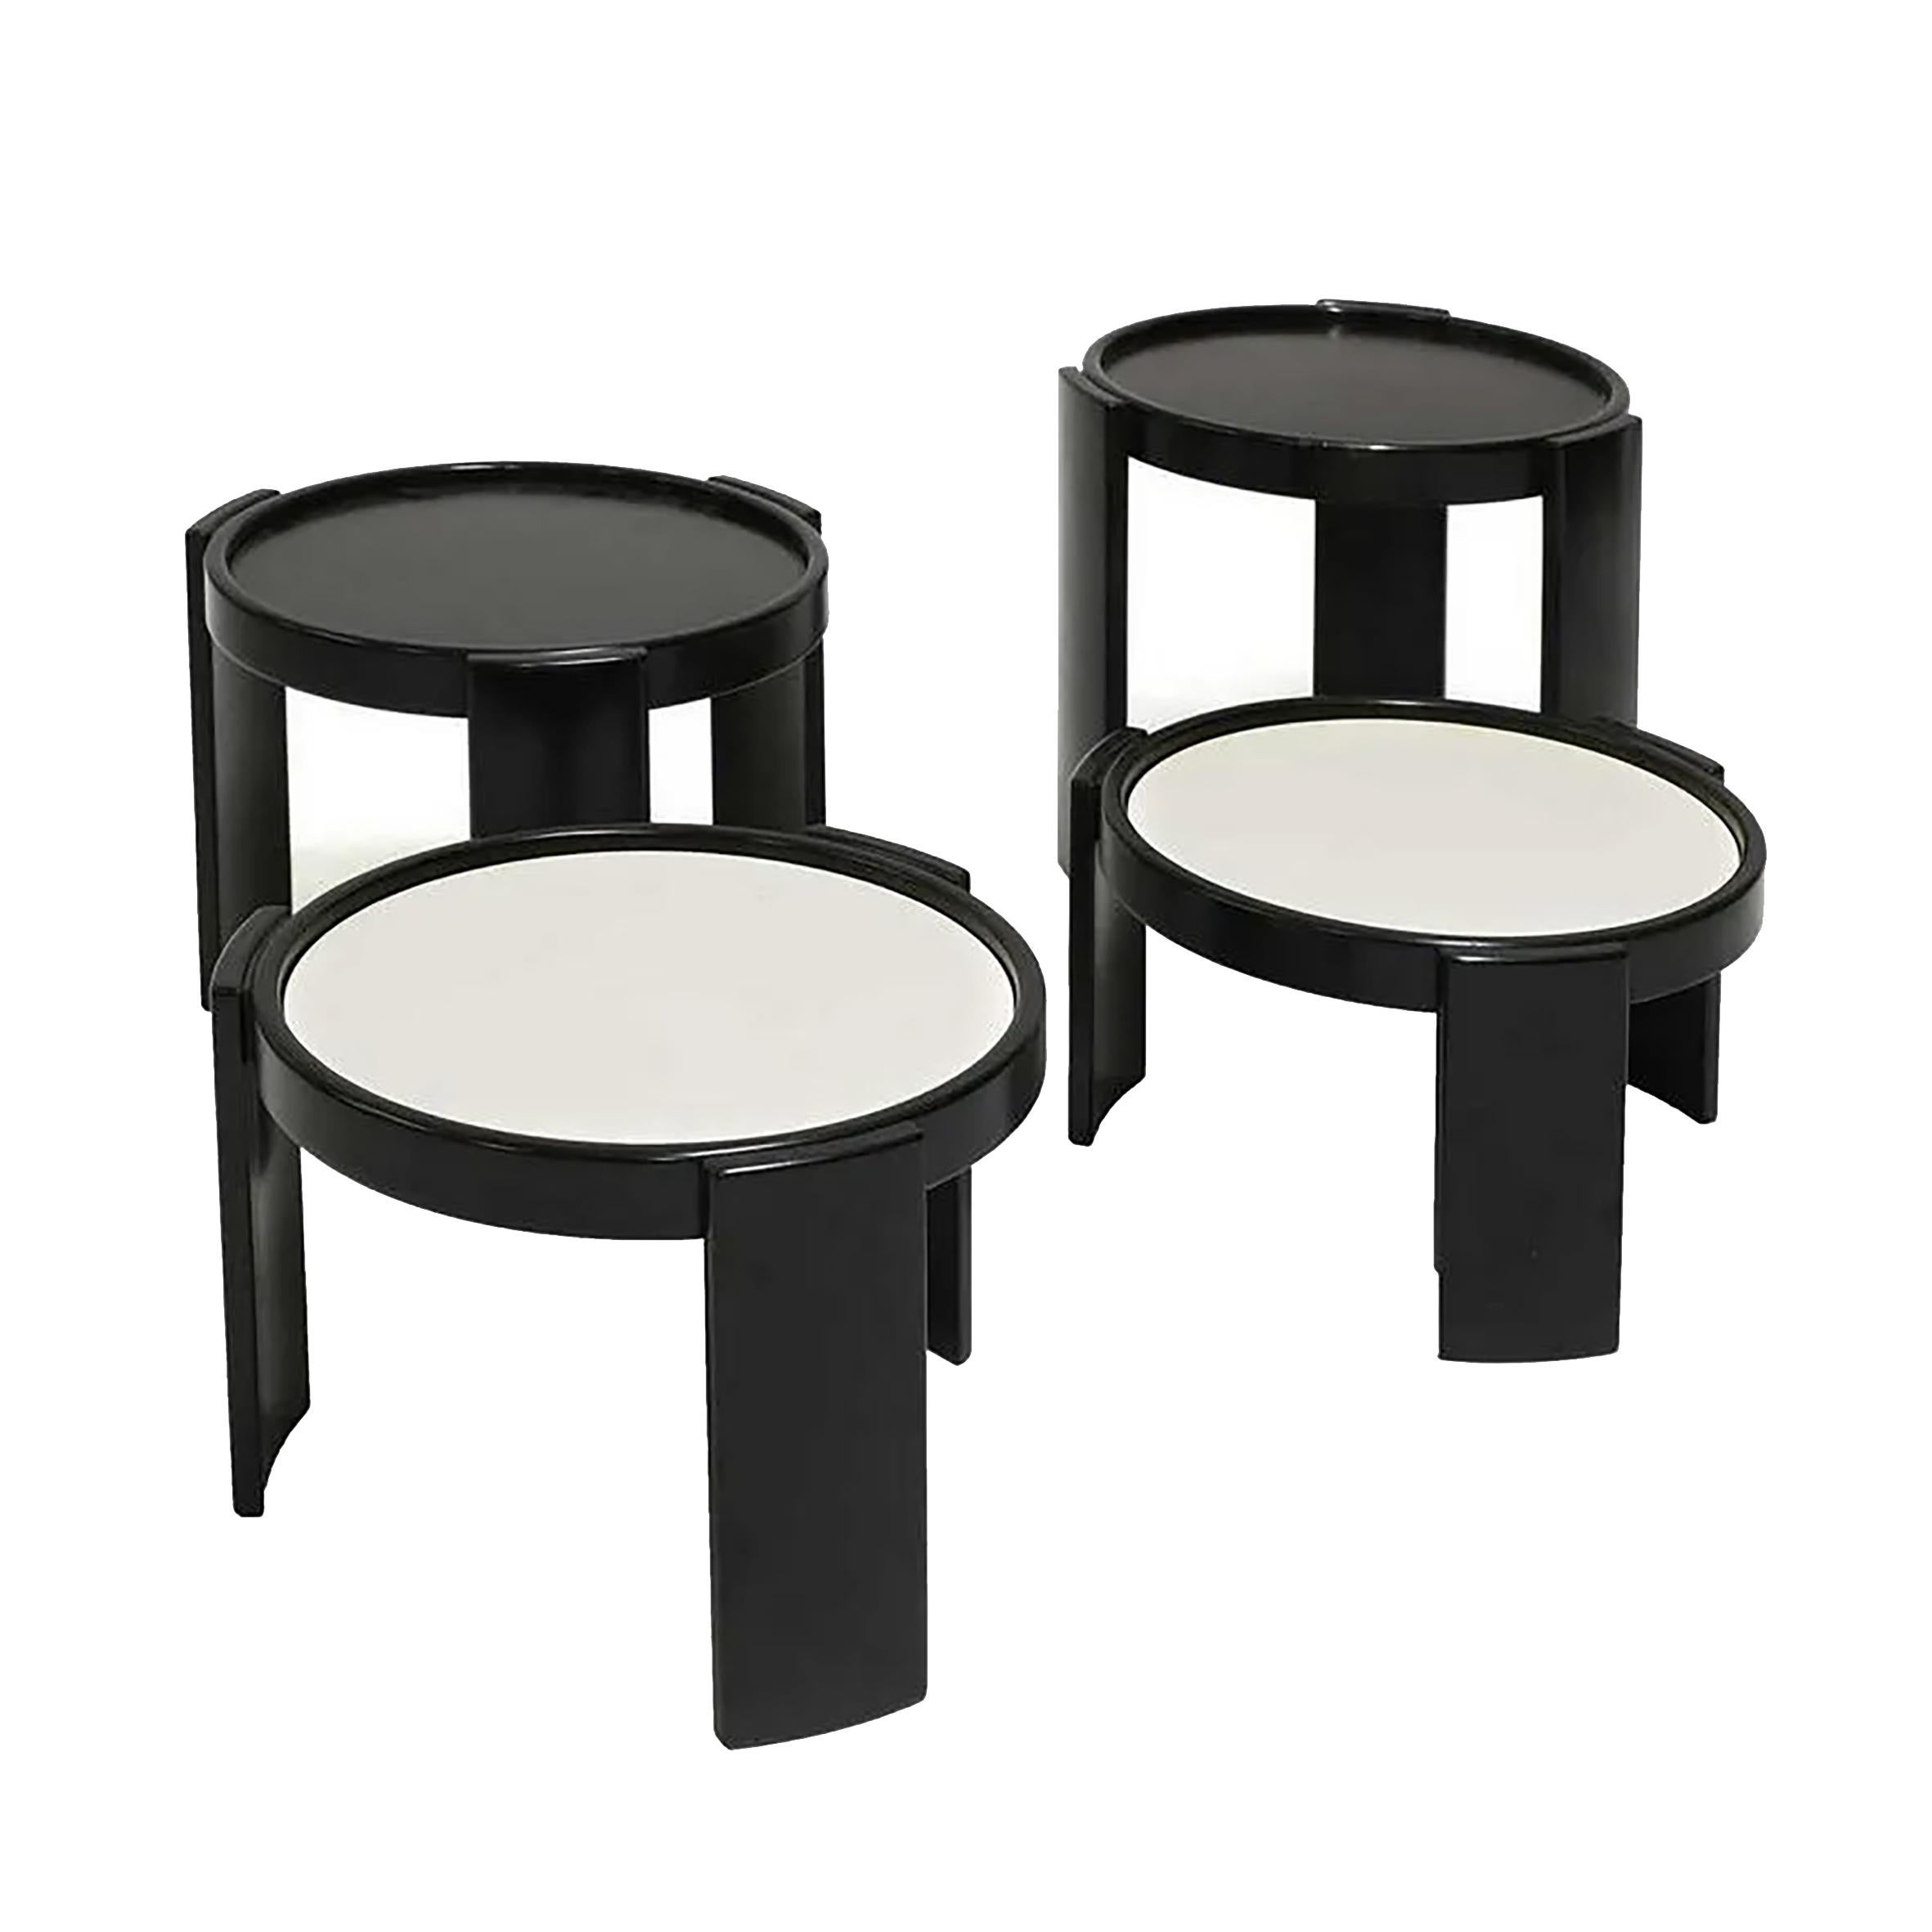 Gianfranco Frattini (1926-2004)

780

A set of four stacking nesting round tables.
The circular black lacquered wood frame with removable reversible black and white laminate tops.
Manufactured by Cassina, Italy.
1966.

Literature
Ottagono